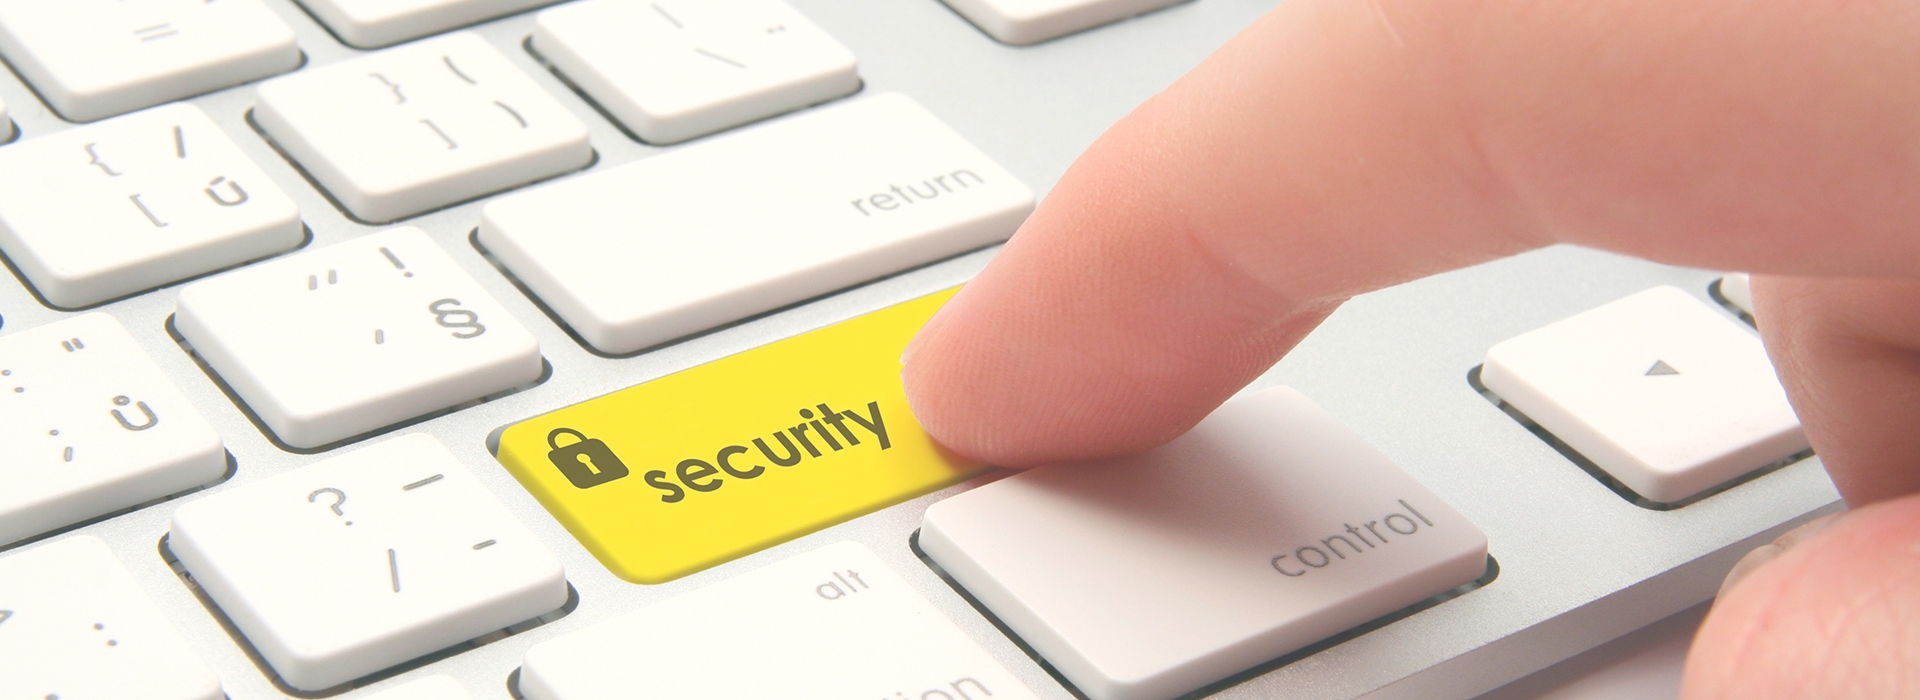 WE PROVIDE COMPLETE INFORMATION SECURITY SERVICES TO OUR CLIENTS